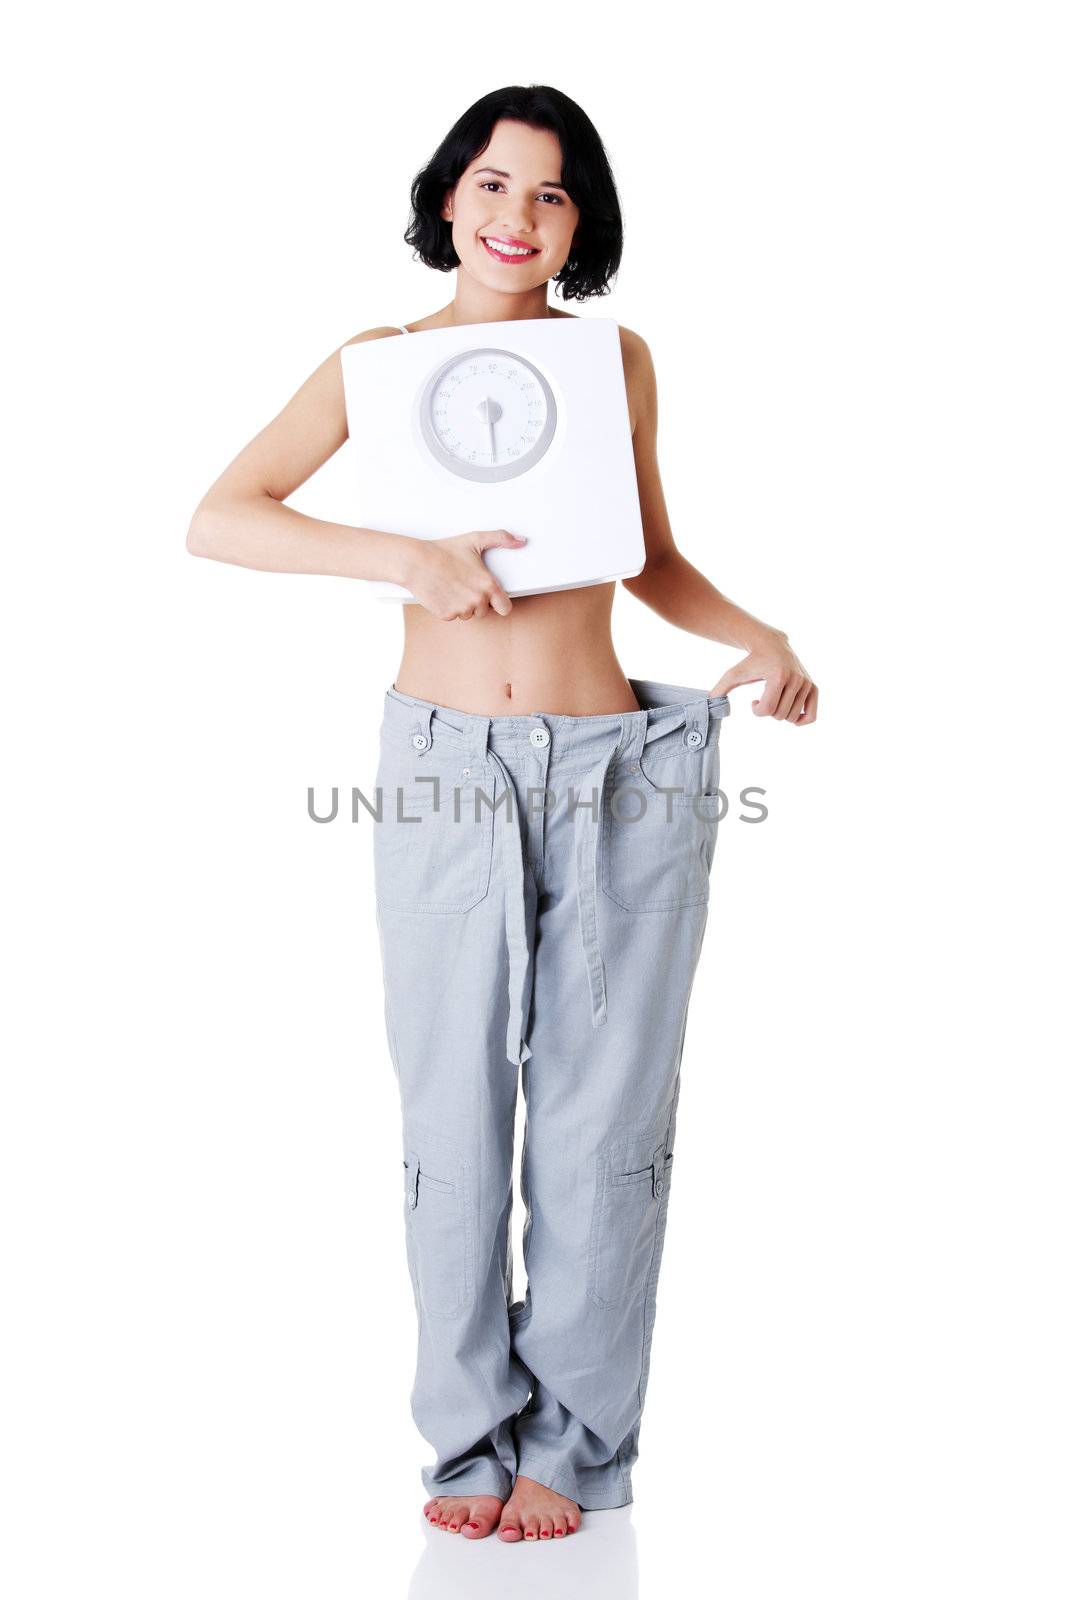 Succesful diet concept - woman with scale.